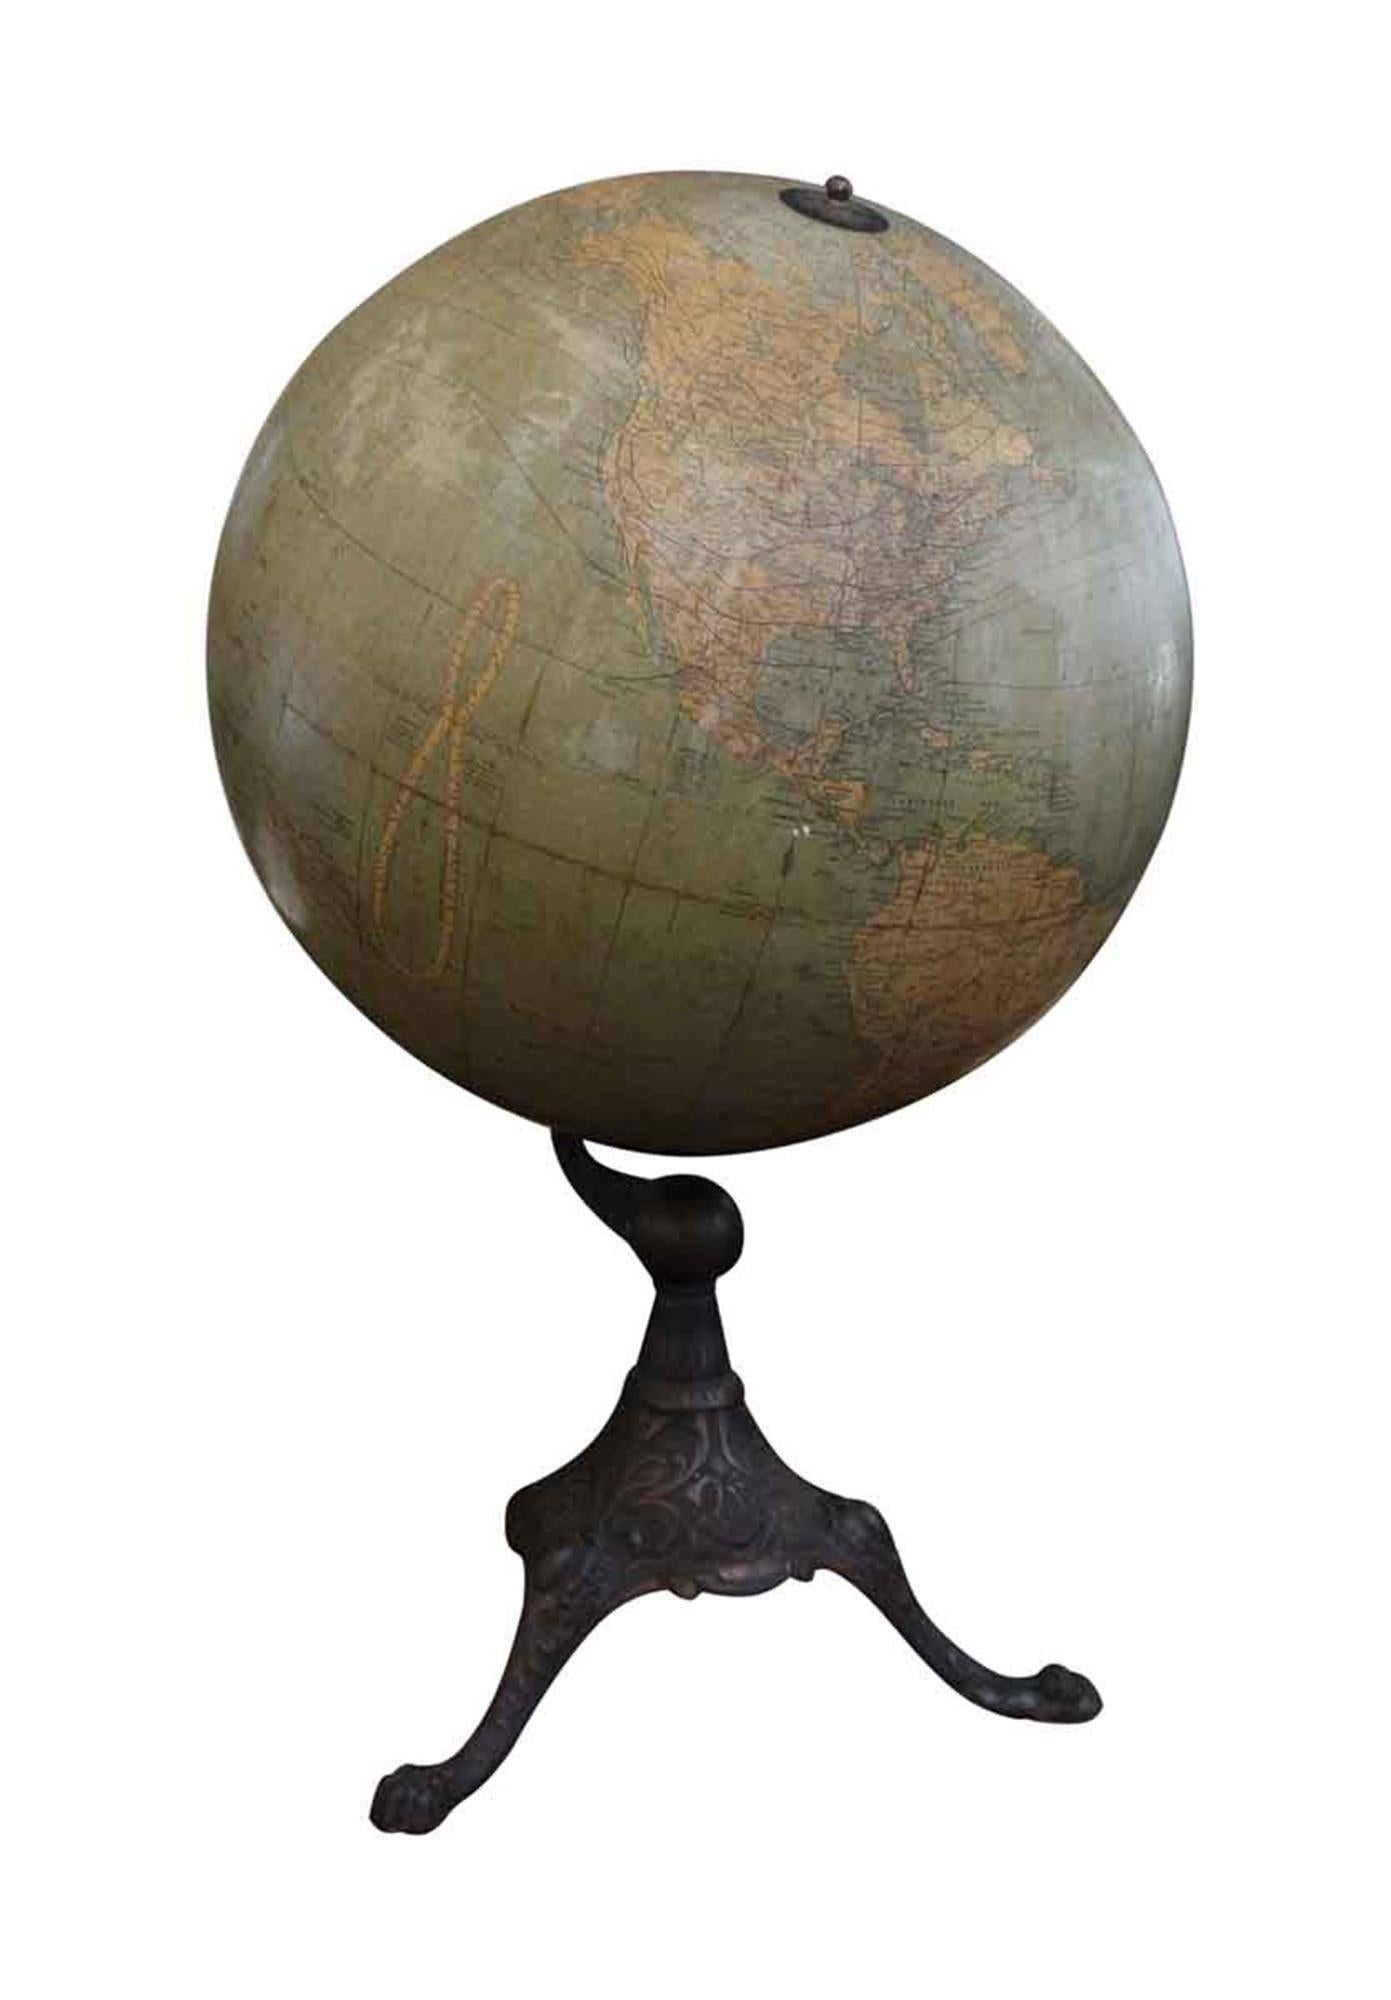 Terrestrial globe from the late 1920s. The metal globe is set on a decorative cast iron base, and was likely used in a classroom or library setting. This can be seen at our 2420 Broadway location on the upper west side in Manhattan.